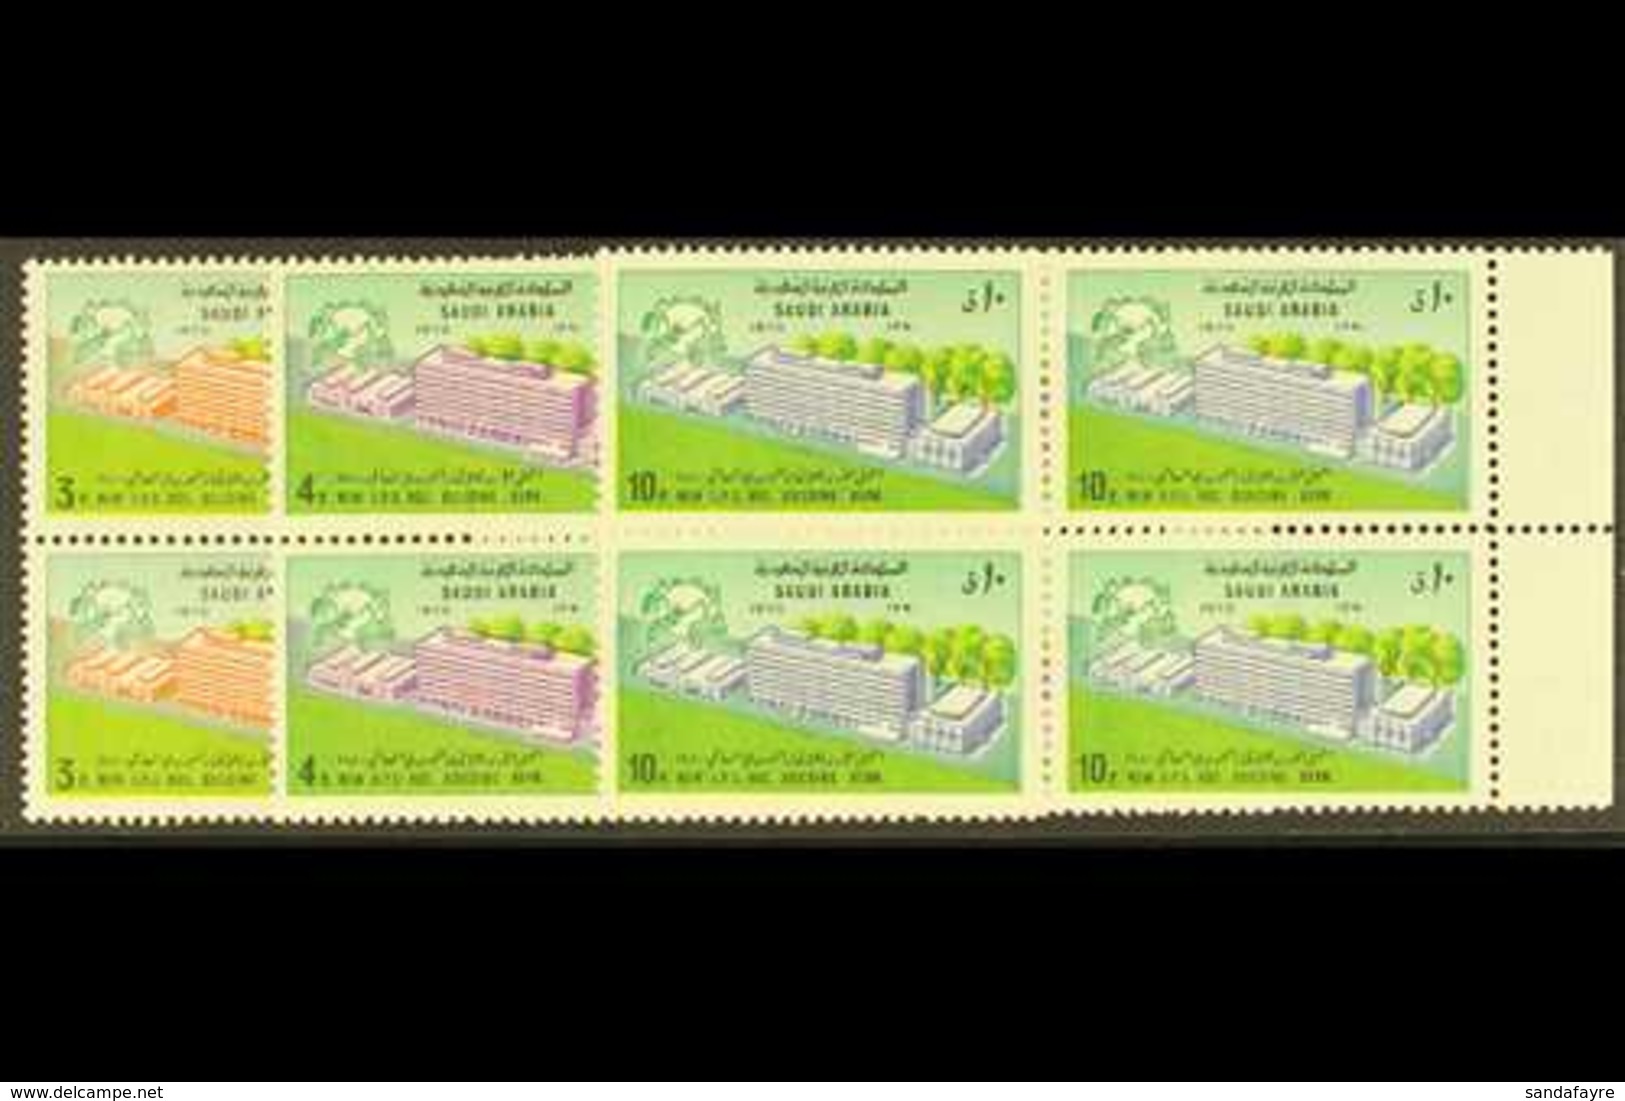 1974 Inauguration Of UPU Headquarters Set Complete, SG 1084/6, In Never Hinged Marginal Blocks Of 4. (12 Stamps) For Mor - Saoedi-Arabië